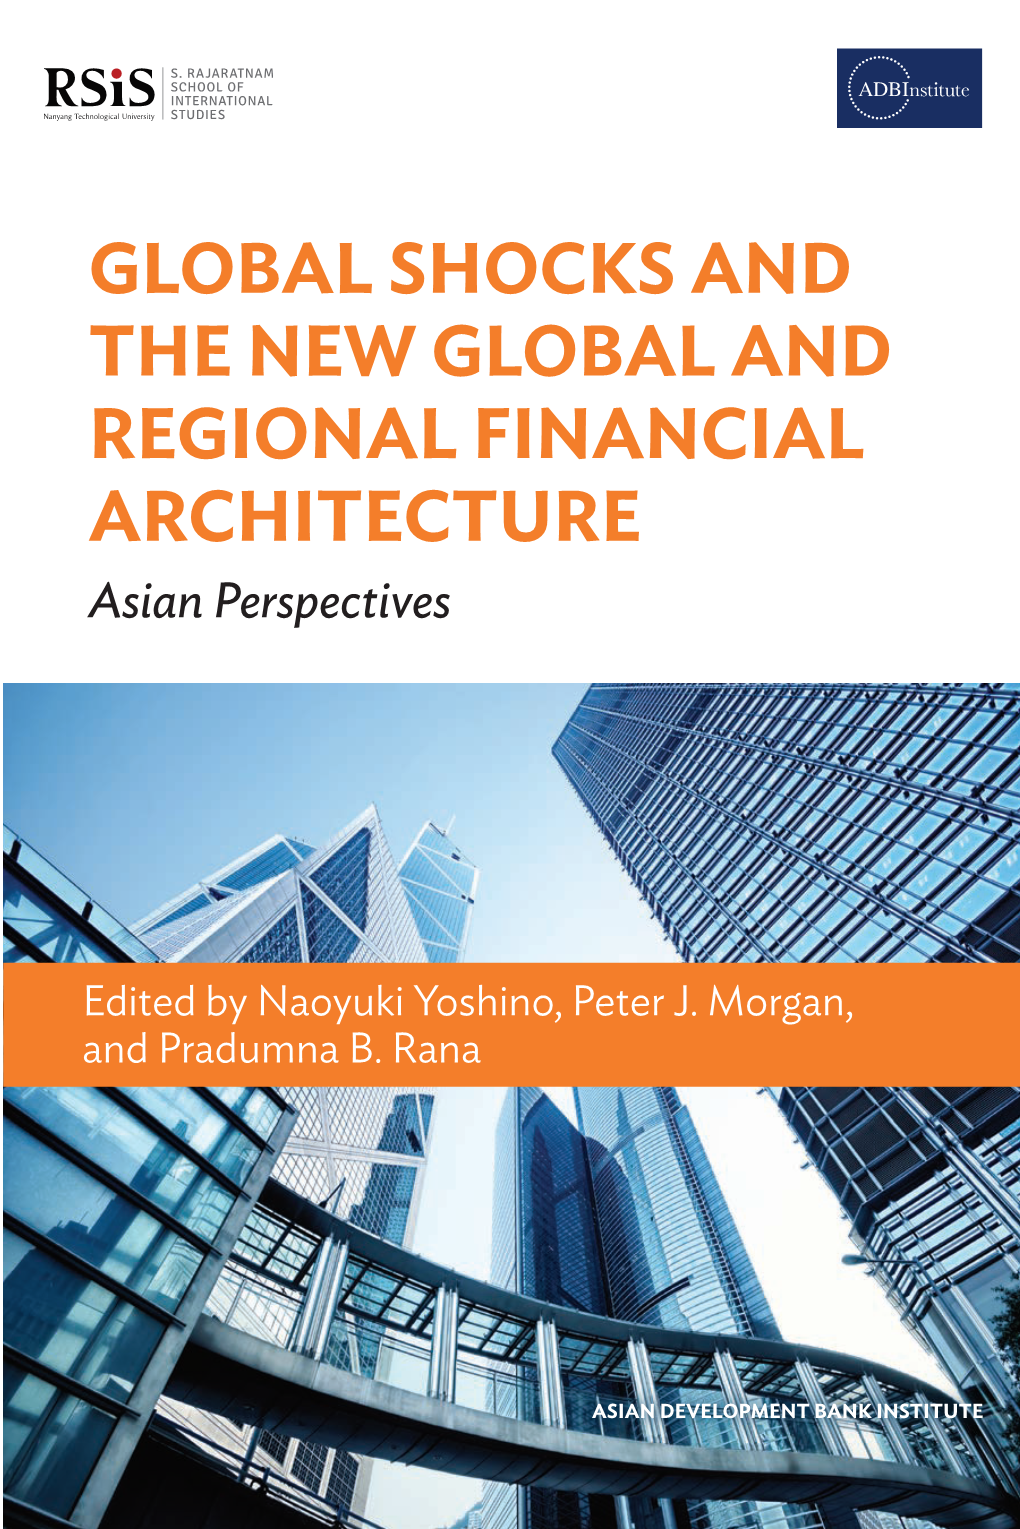 Global Shocks and the New Global and Regional Financial Architecture: Asian Perspectives